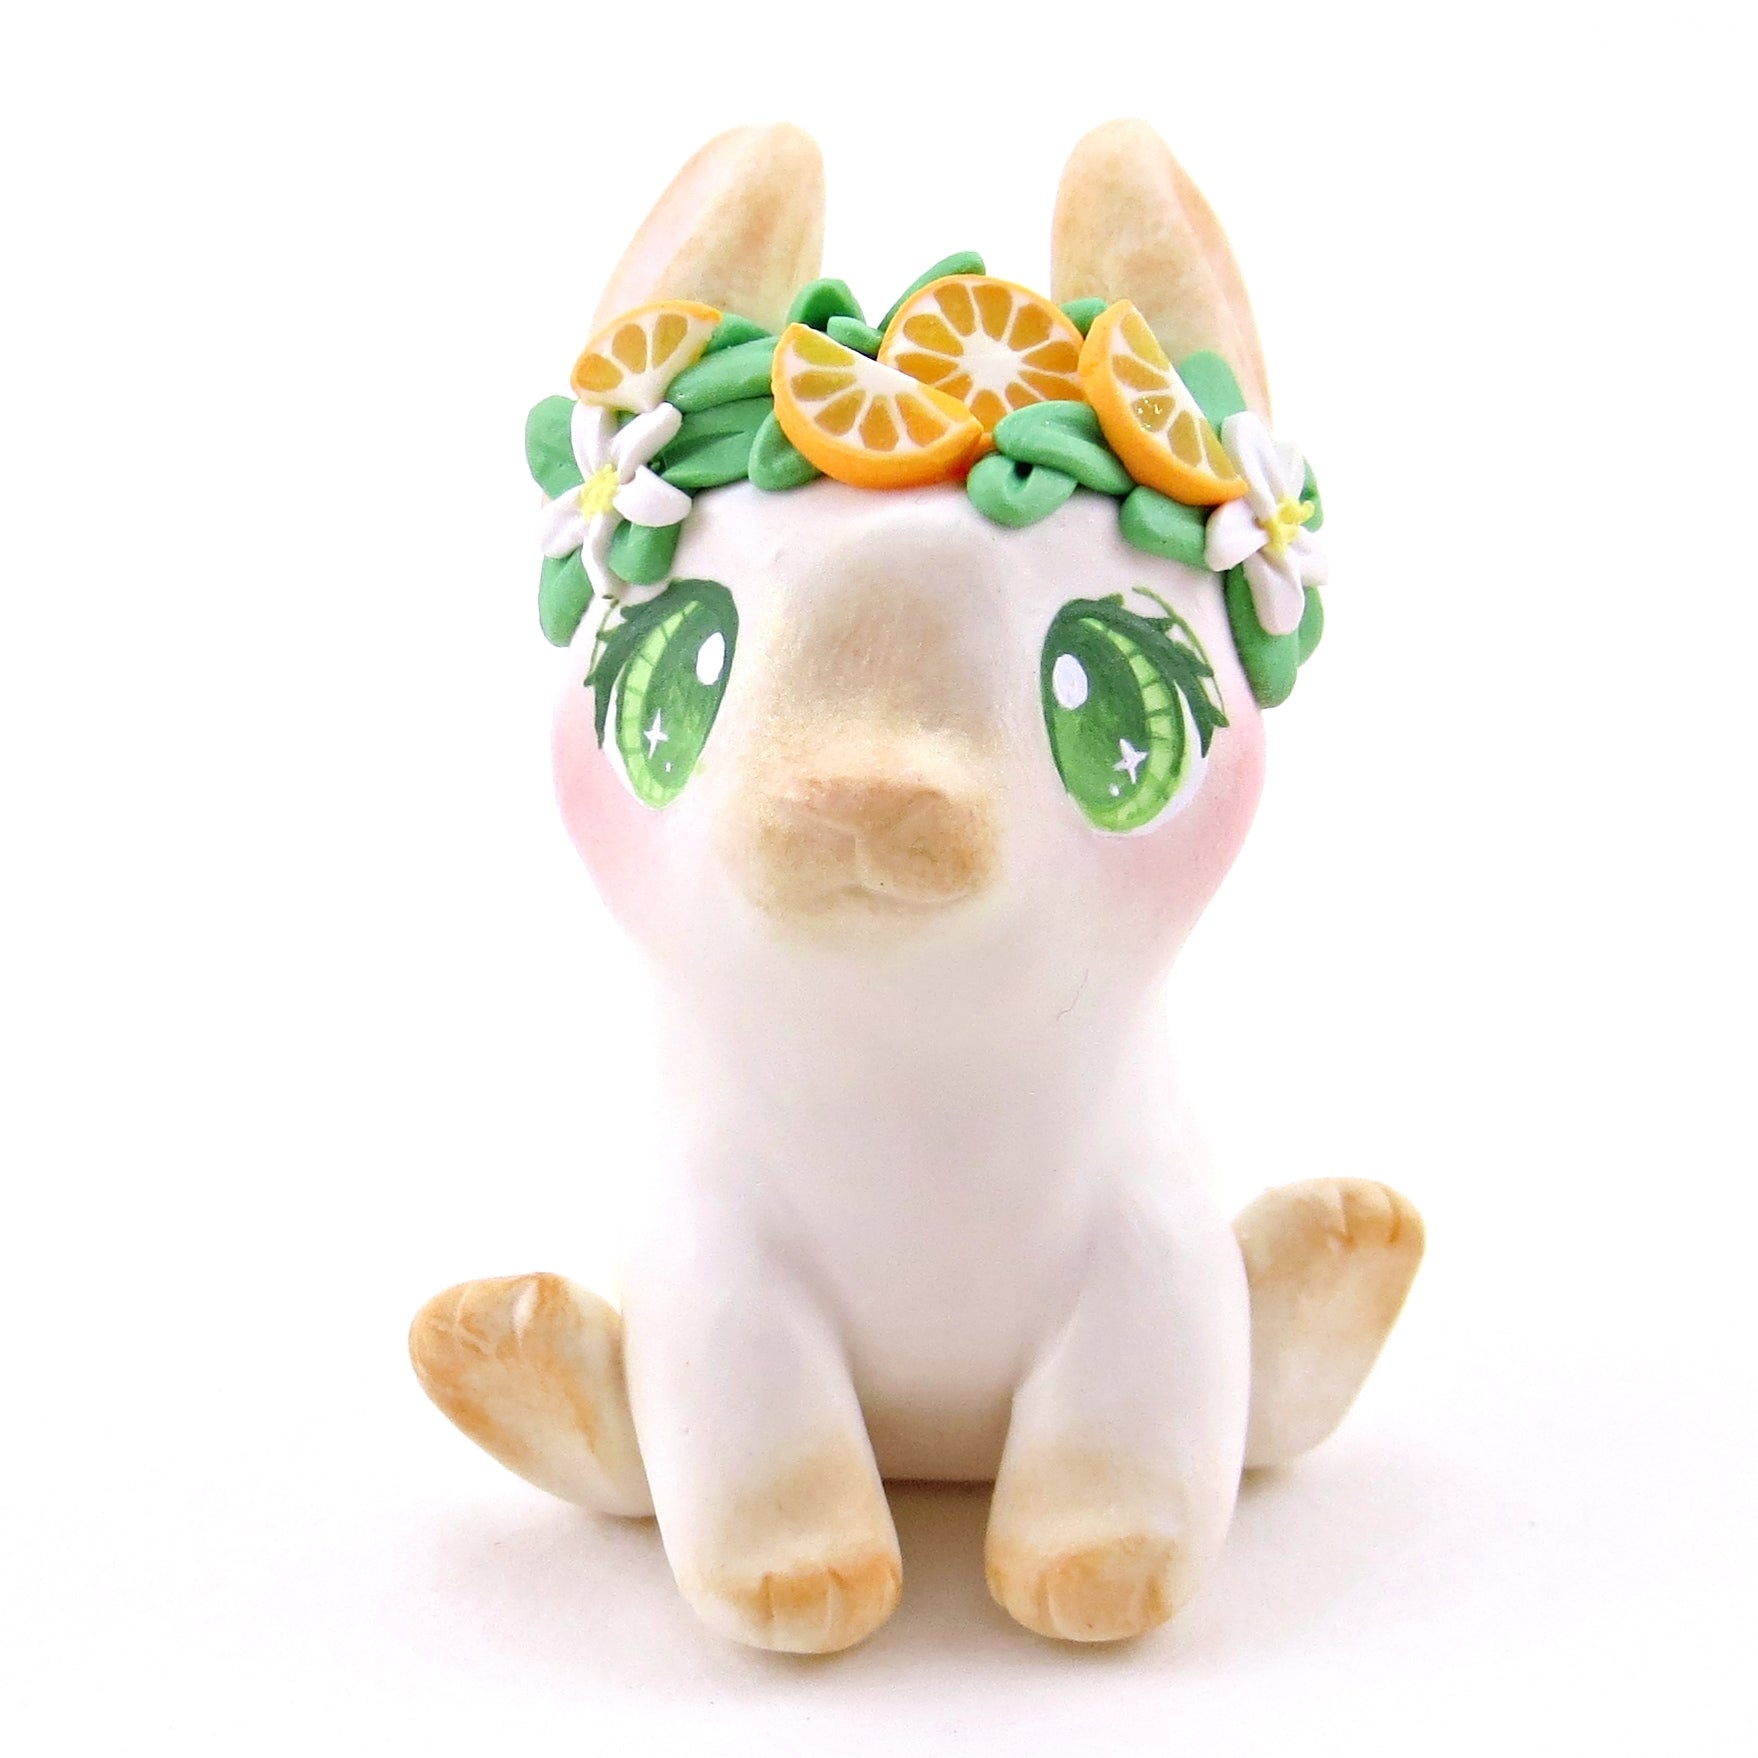 Orange Crown Bunny Figurine - Polymer Clay Animals Cottagecore Fruit Collection